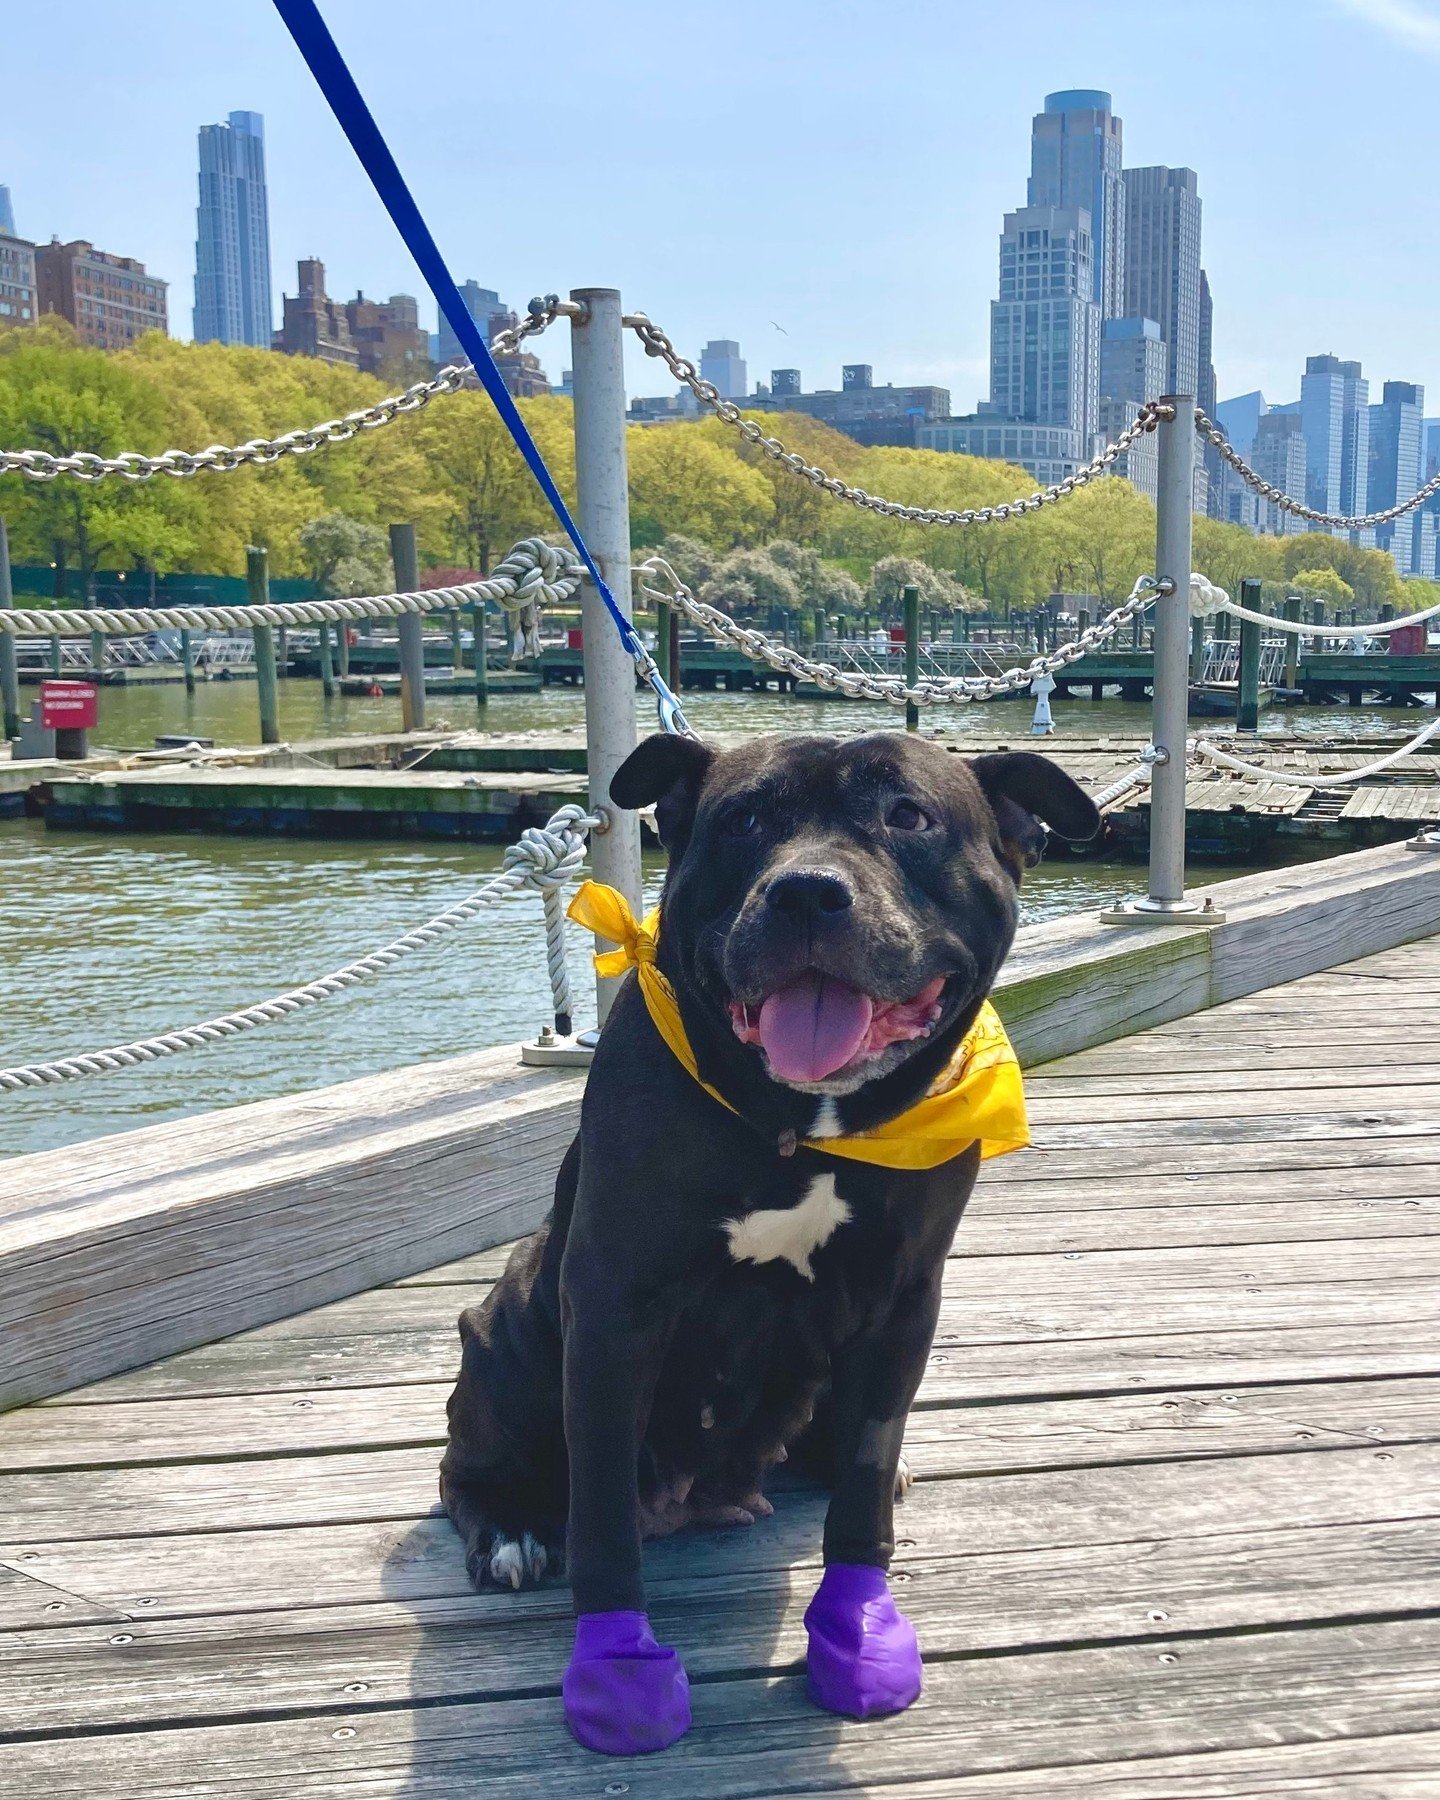 Get your special shoes on, it's time for Breakdance! 🕺

This Native New Yorker from @nycacc is as cute as they come. Affectionately known as &quot;Breakie&quot; to her closest pals, this sweet senior loves to be around her people, snuggle and get lo